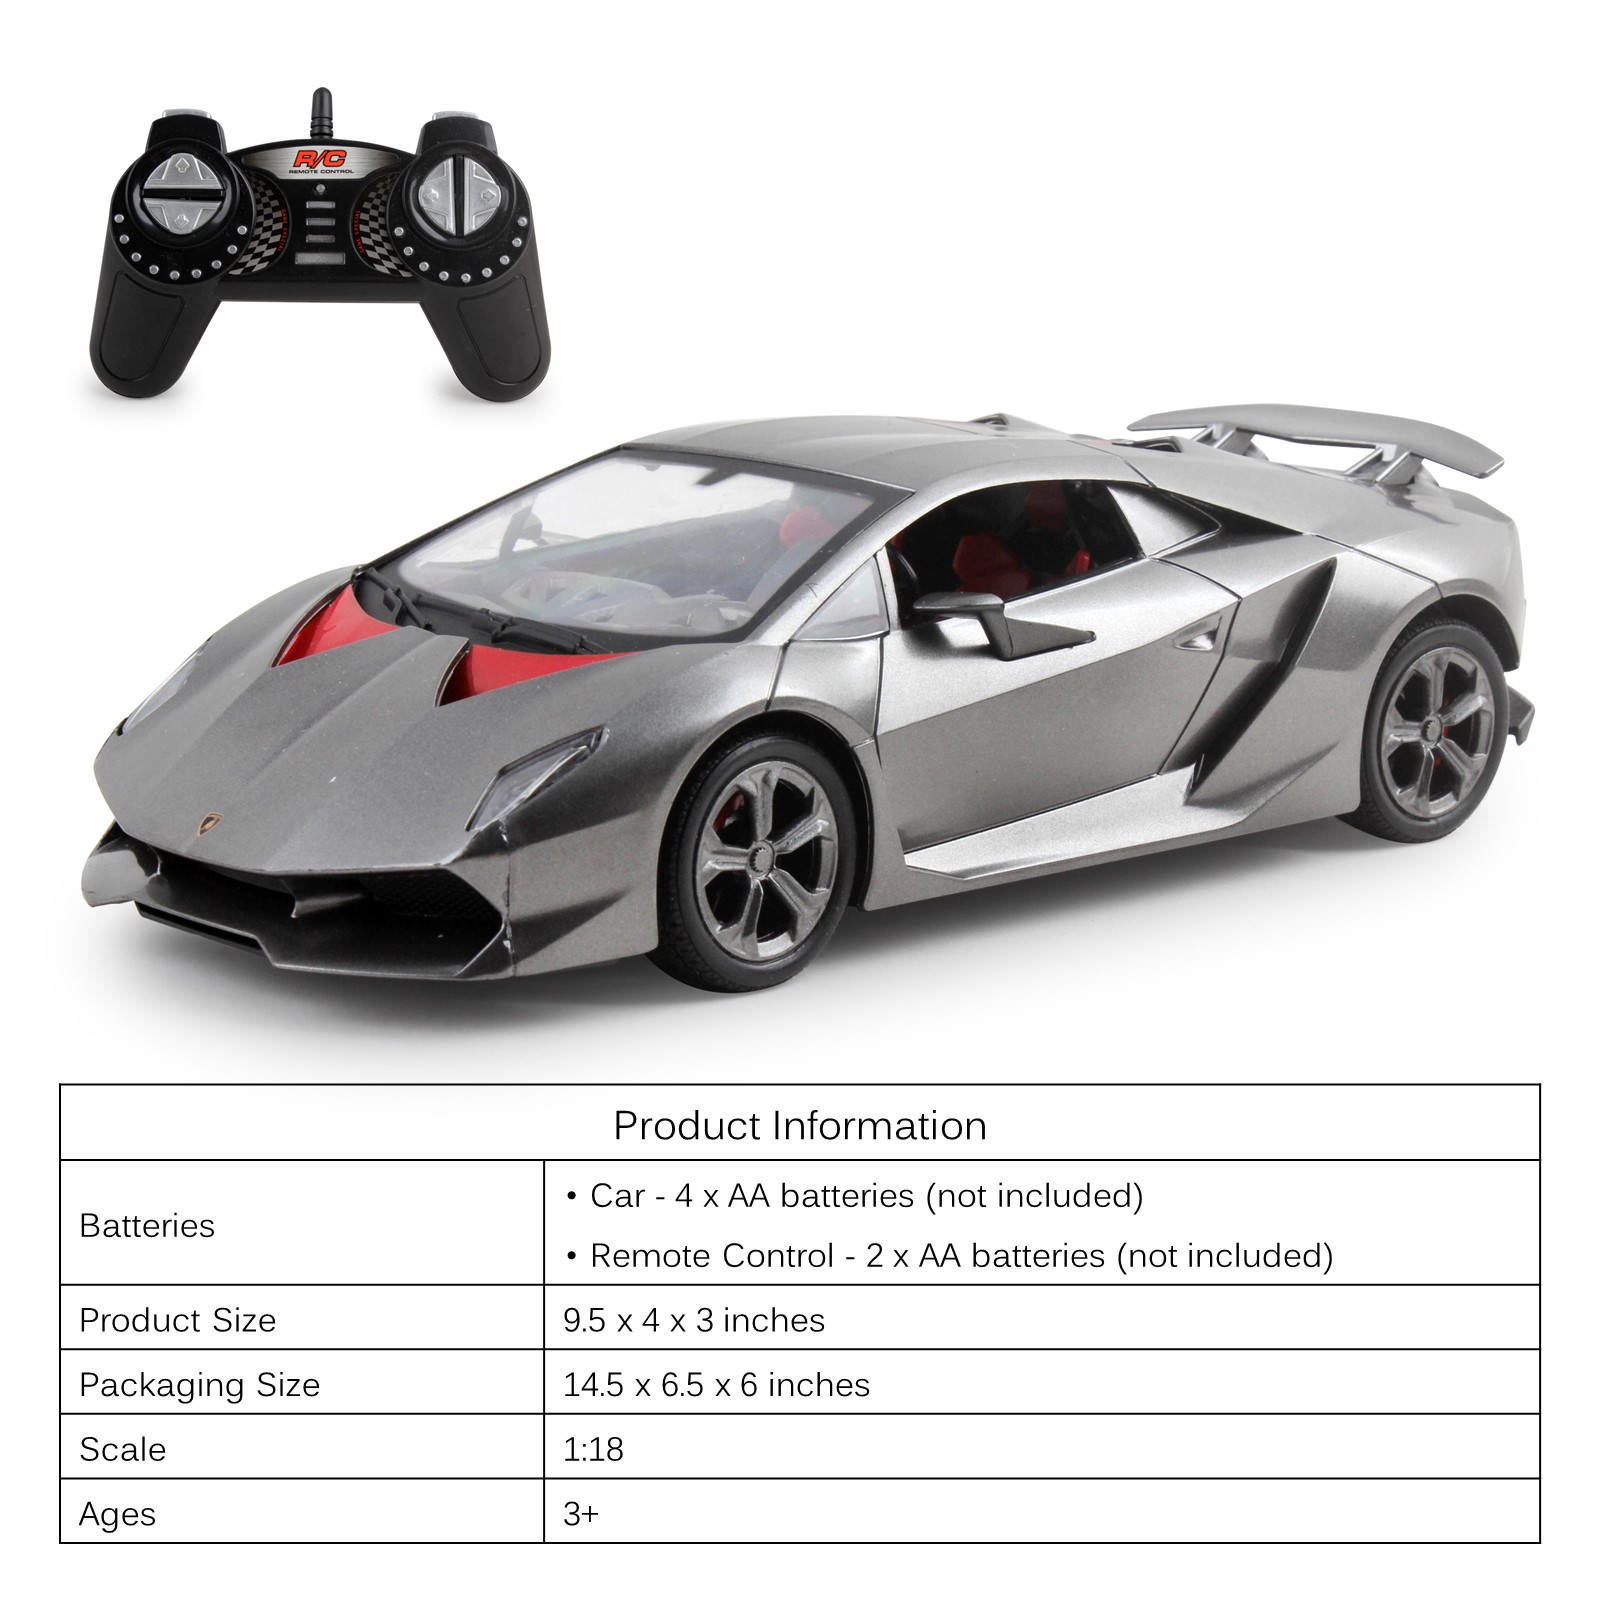 Vokodo RC Super Car 1:18 Scale Remote Control Full Function Easy to Operate Kids Toy Exotic Sports Model with Working LED Headlights Luxury Race Vehicle for Children Boys and Girls TL-90